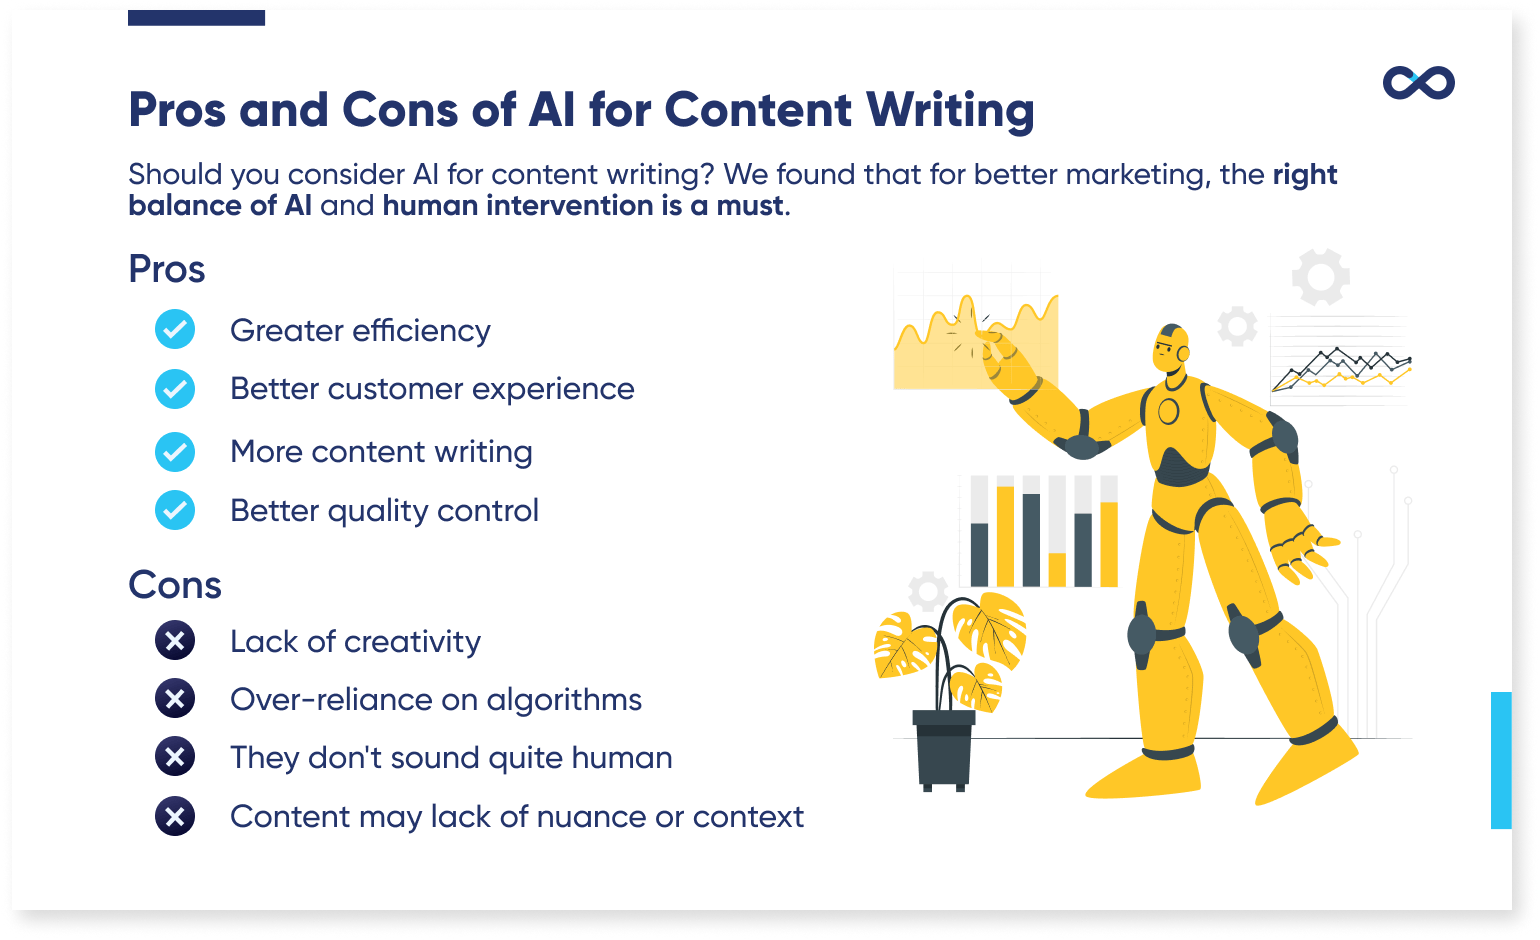 pros and cons of AI for content writing